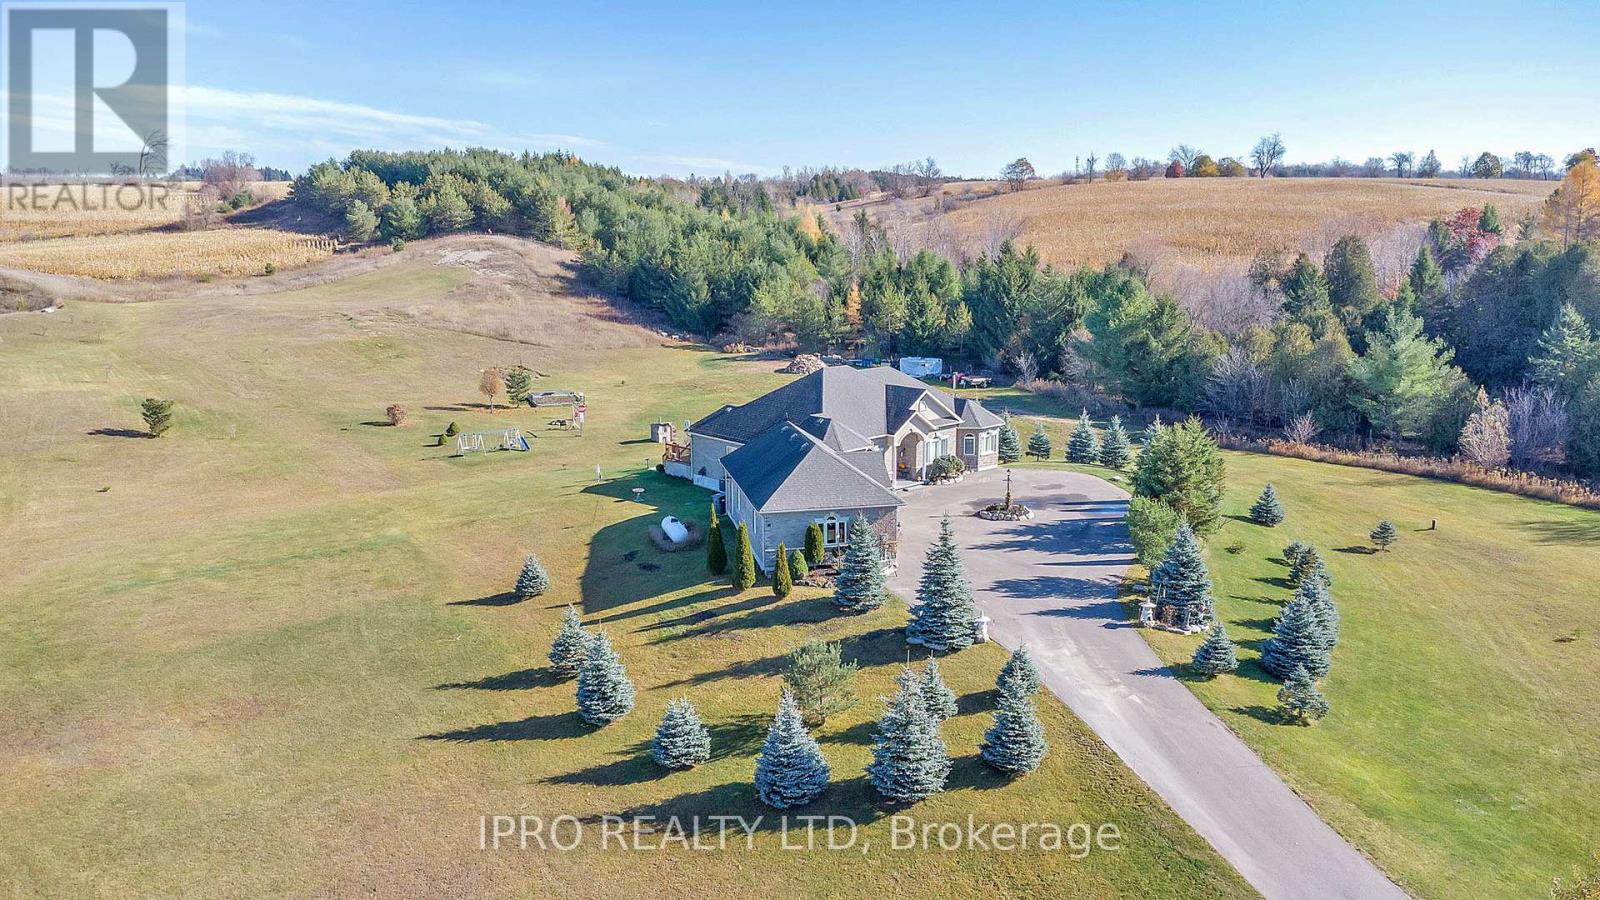 20051 Willoughby Rd, Caledon, Ontario  L7K 1W1 - Photo 3 - W8277608